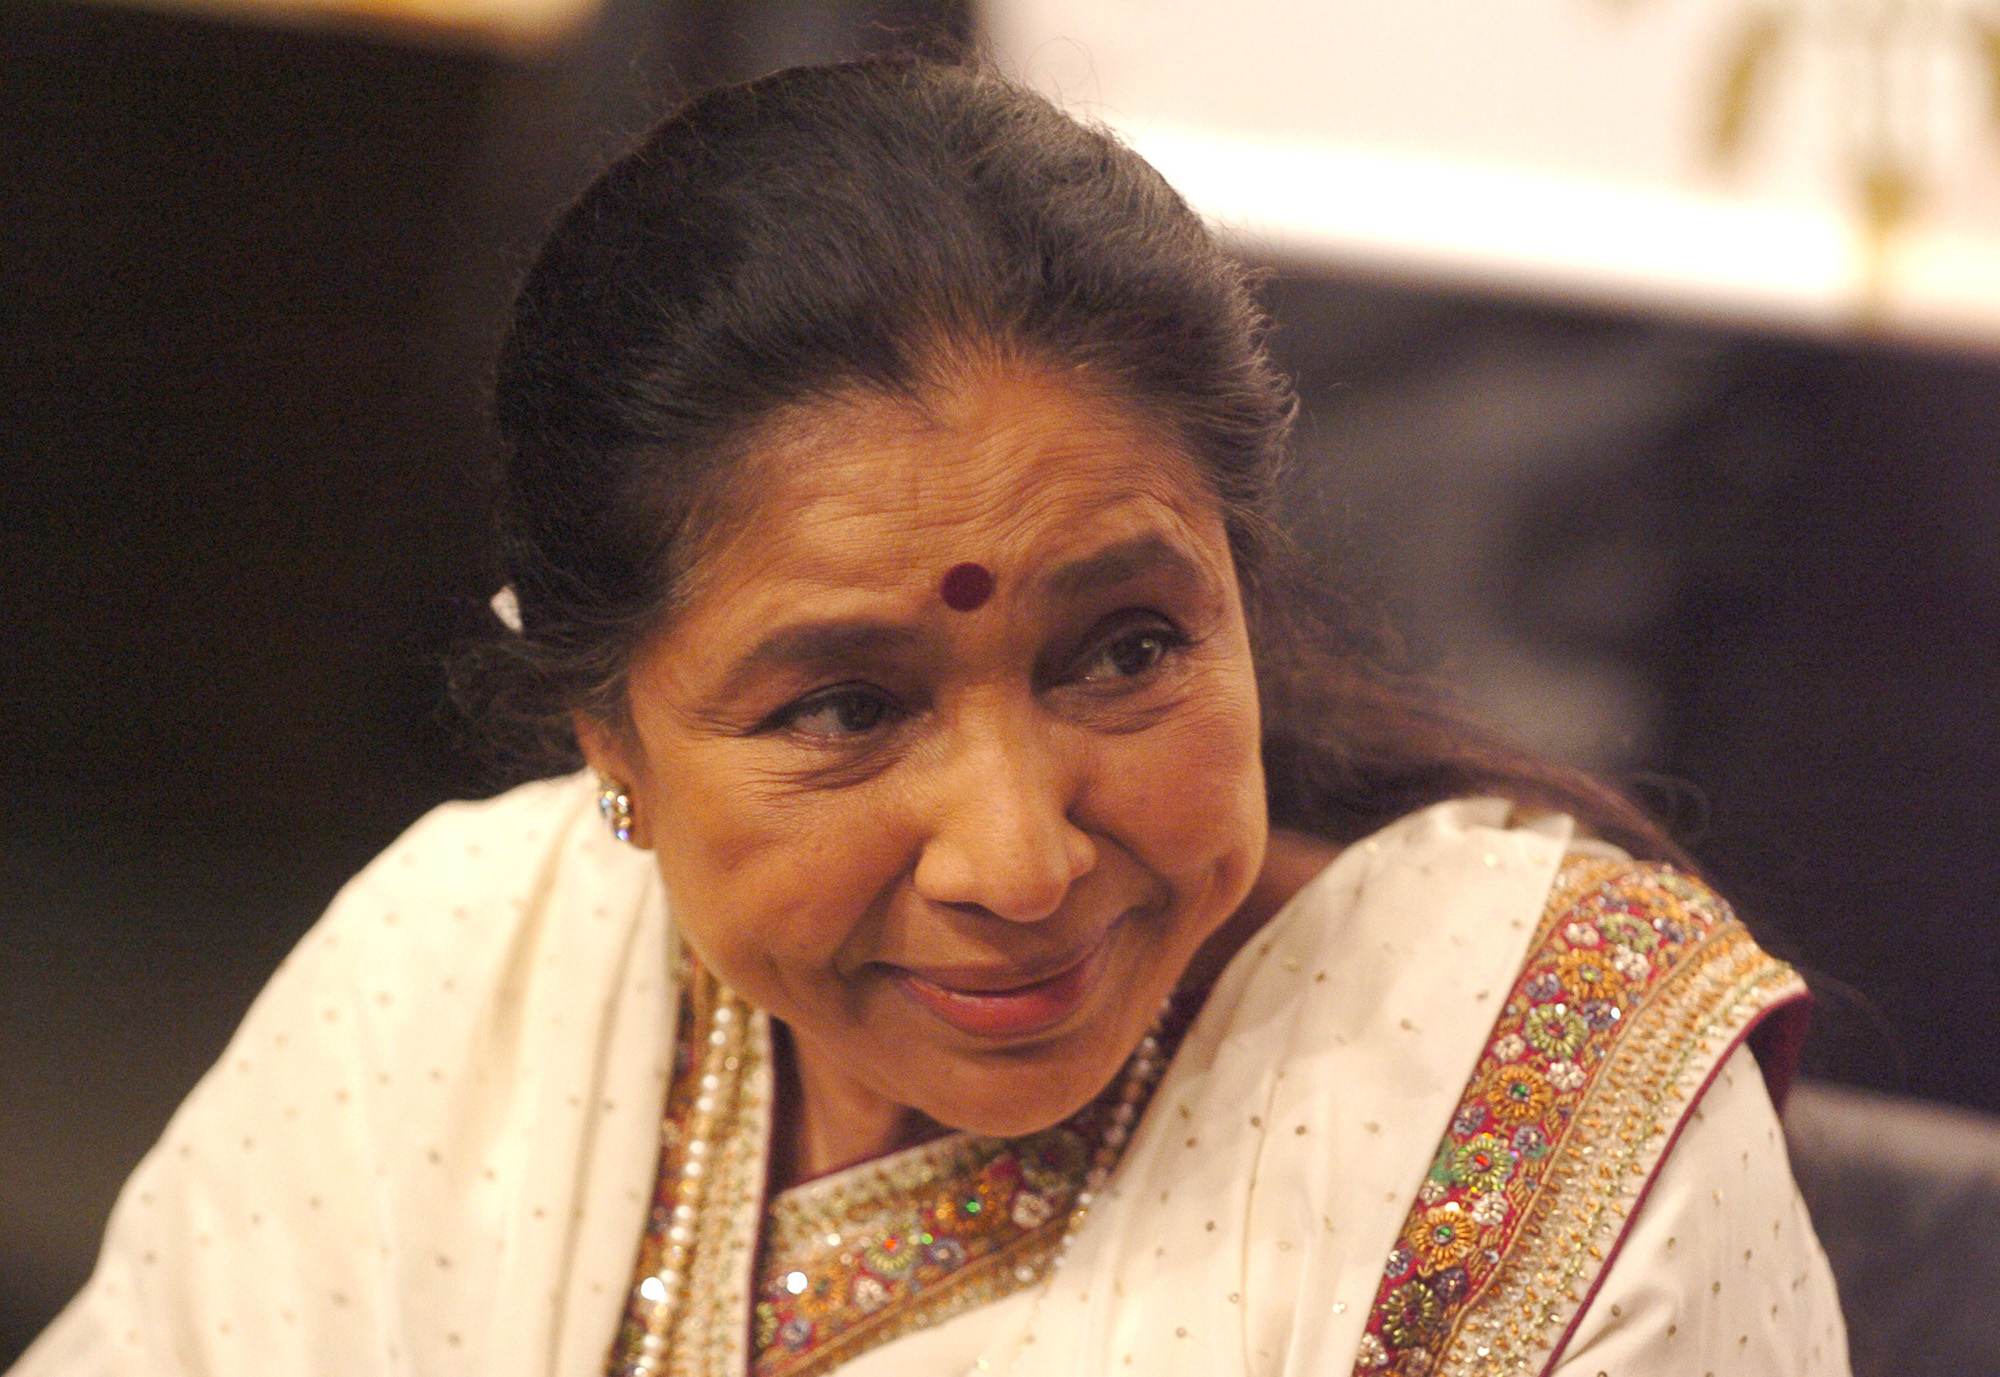 Asha Bhosle during MTV Asia Aid - Artists Press Conference at Metropolitan Hotel in Bangkok, Thailand. (Photo by J. Quinton/WireImage)